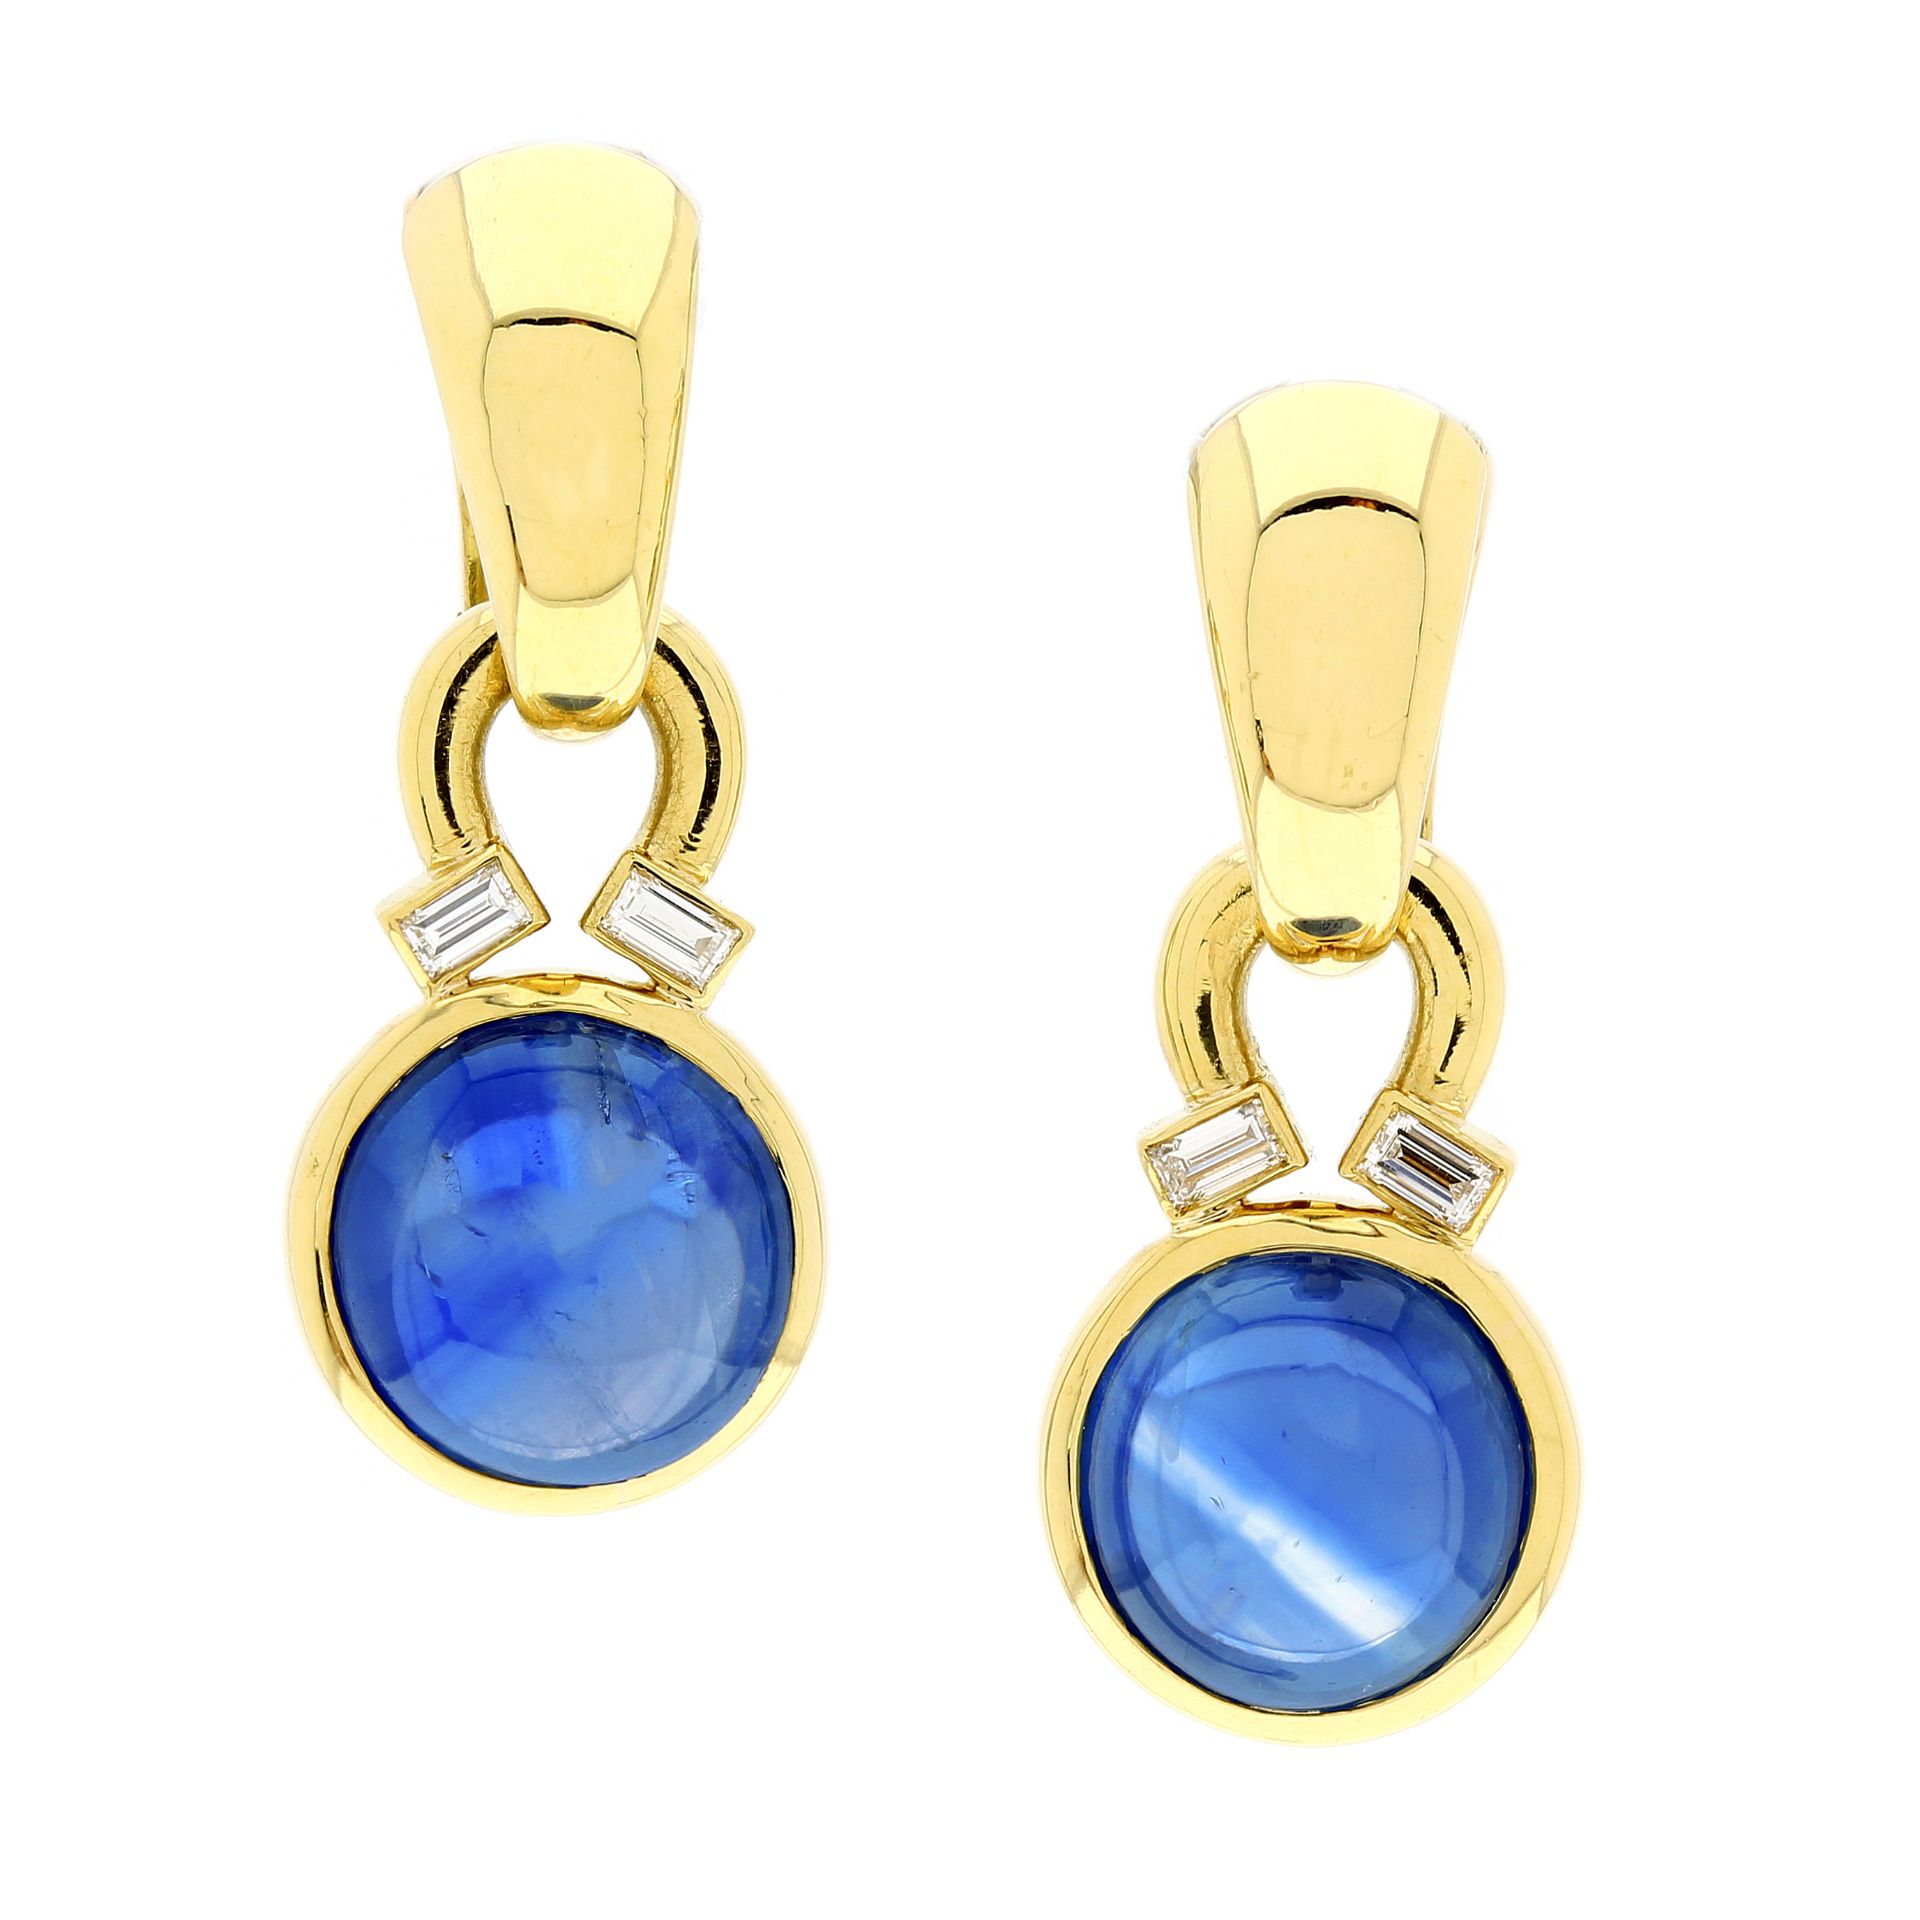 A PAIR OF CEYLON NO HEAT SAPPHIRE AND DIAMOND EARRINGS, BVLGARI in 18ct yellow gold, each set with a